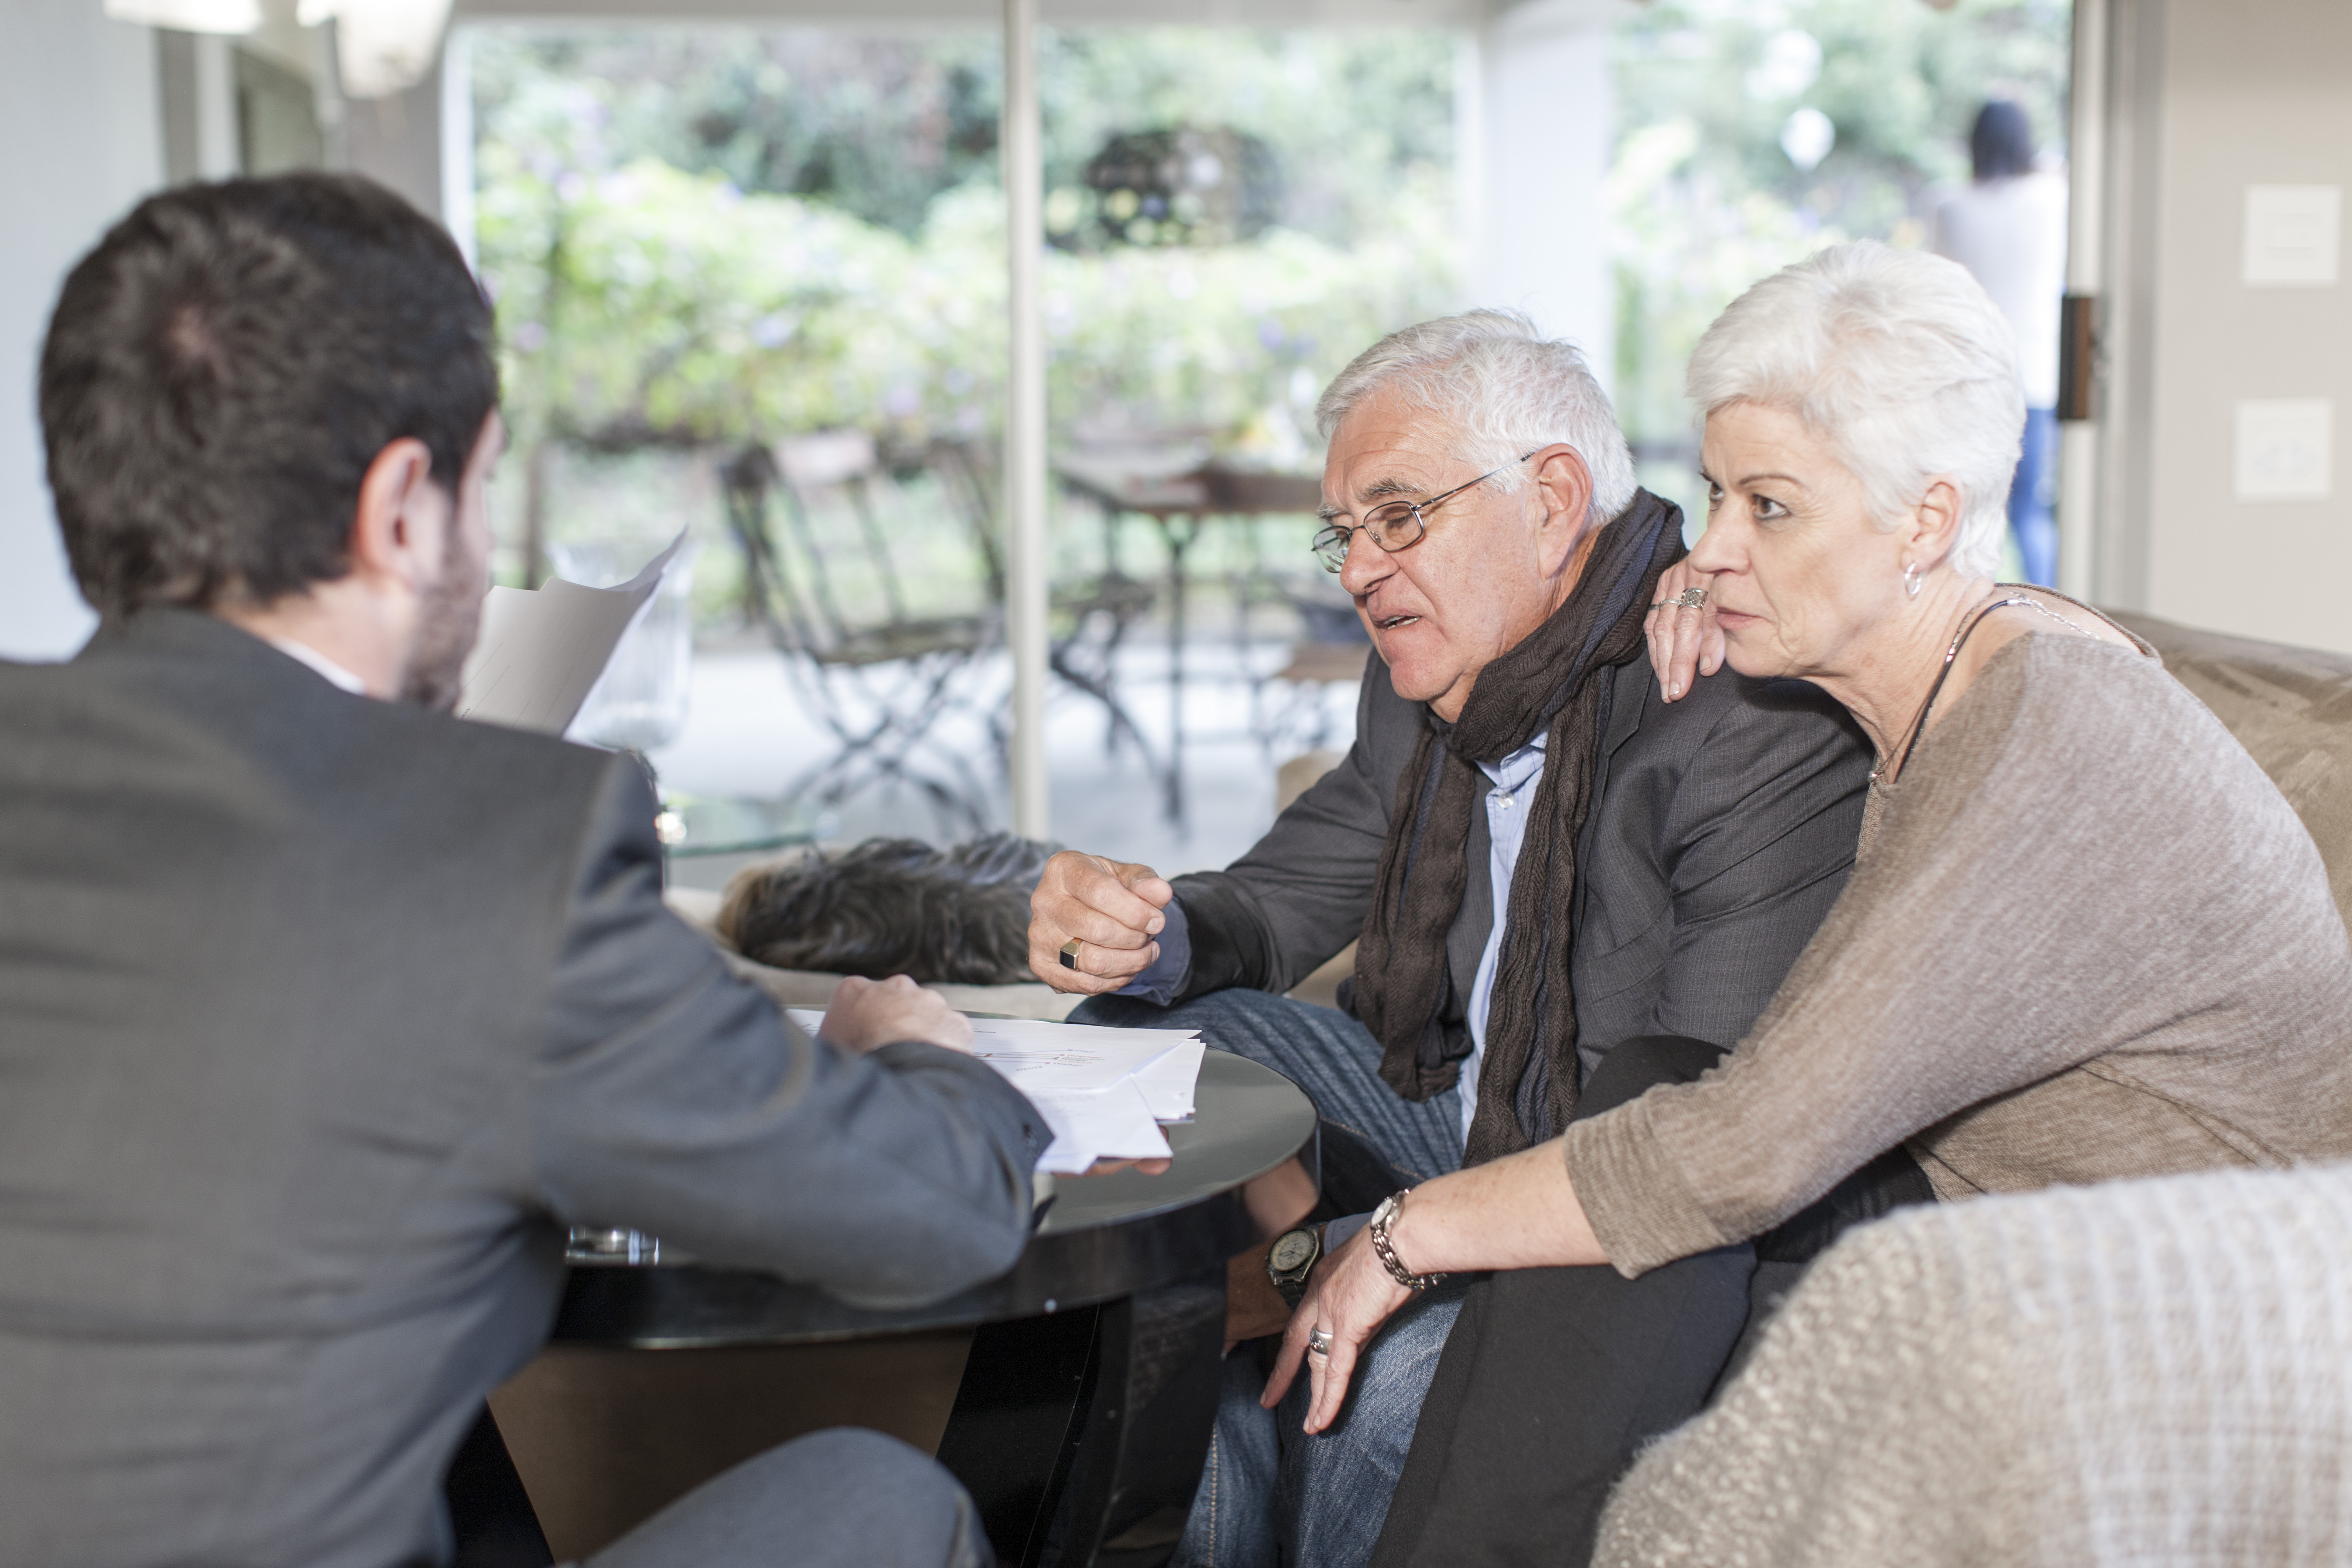 A young man fighting with an old couple | Source: Getty Images